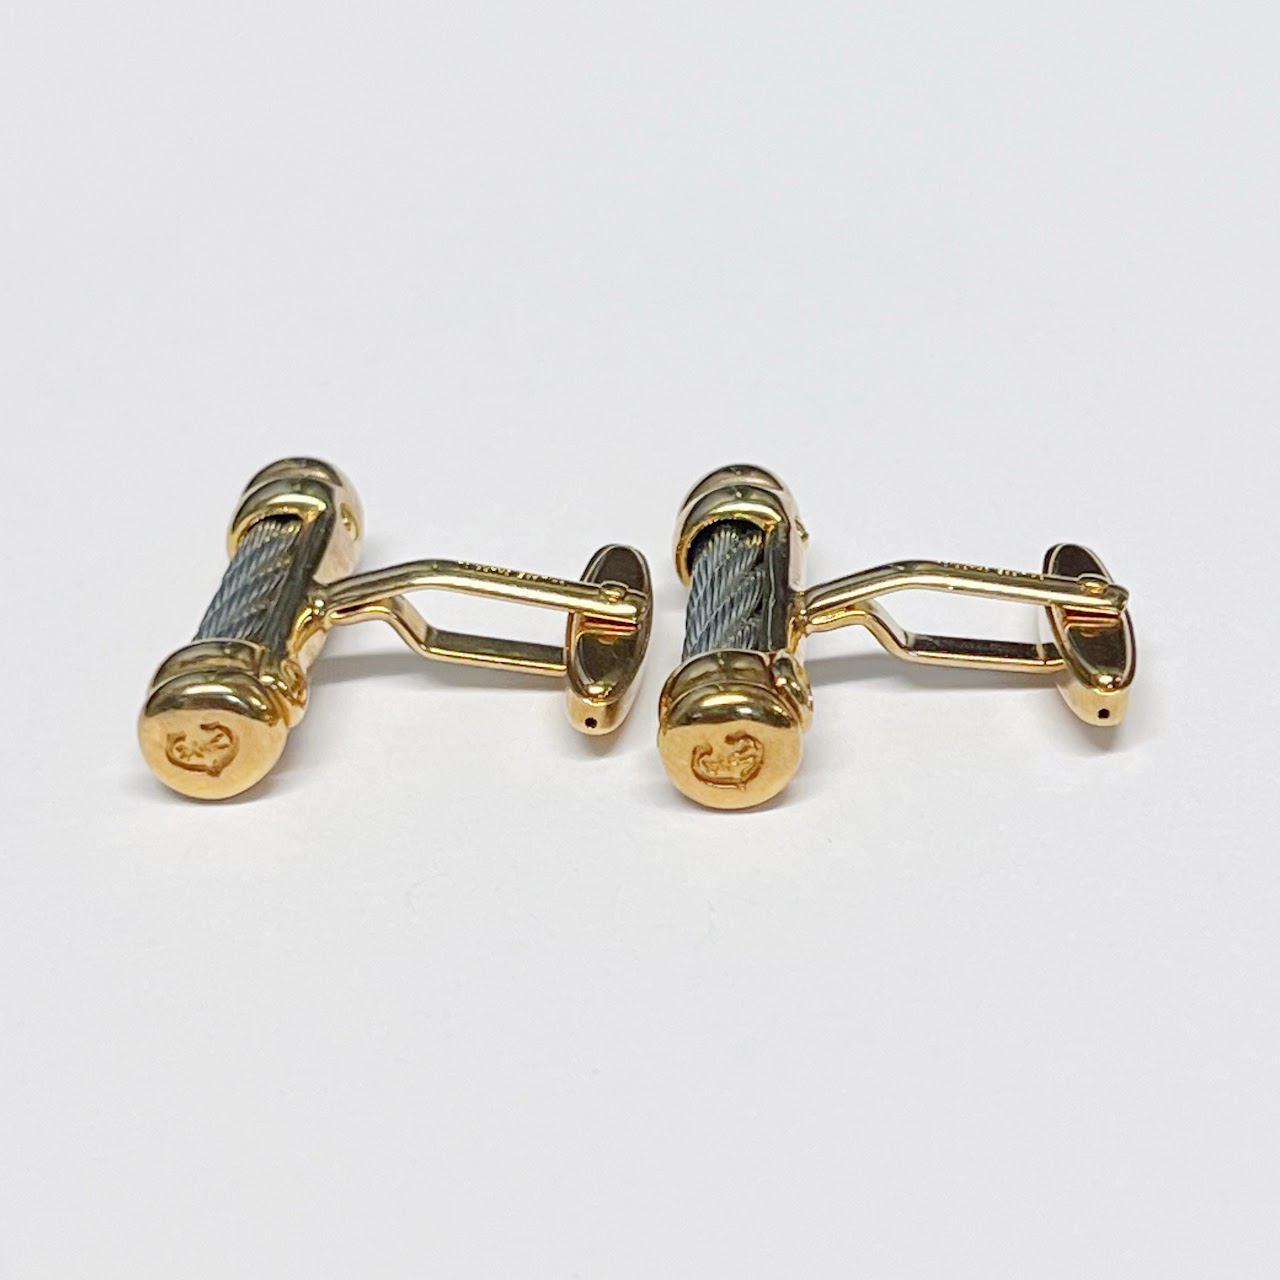 Philippe Charriol Gold Plated and Steel Cable Twist Cufflinks